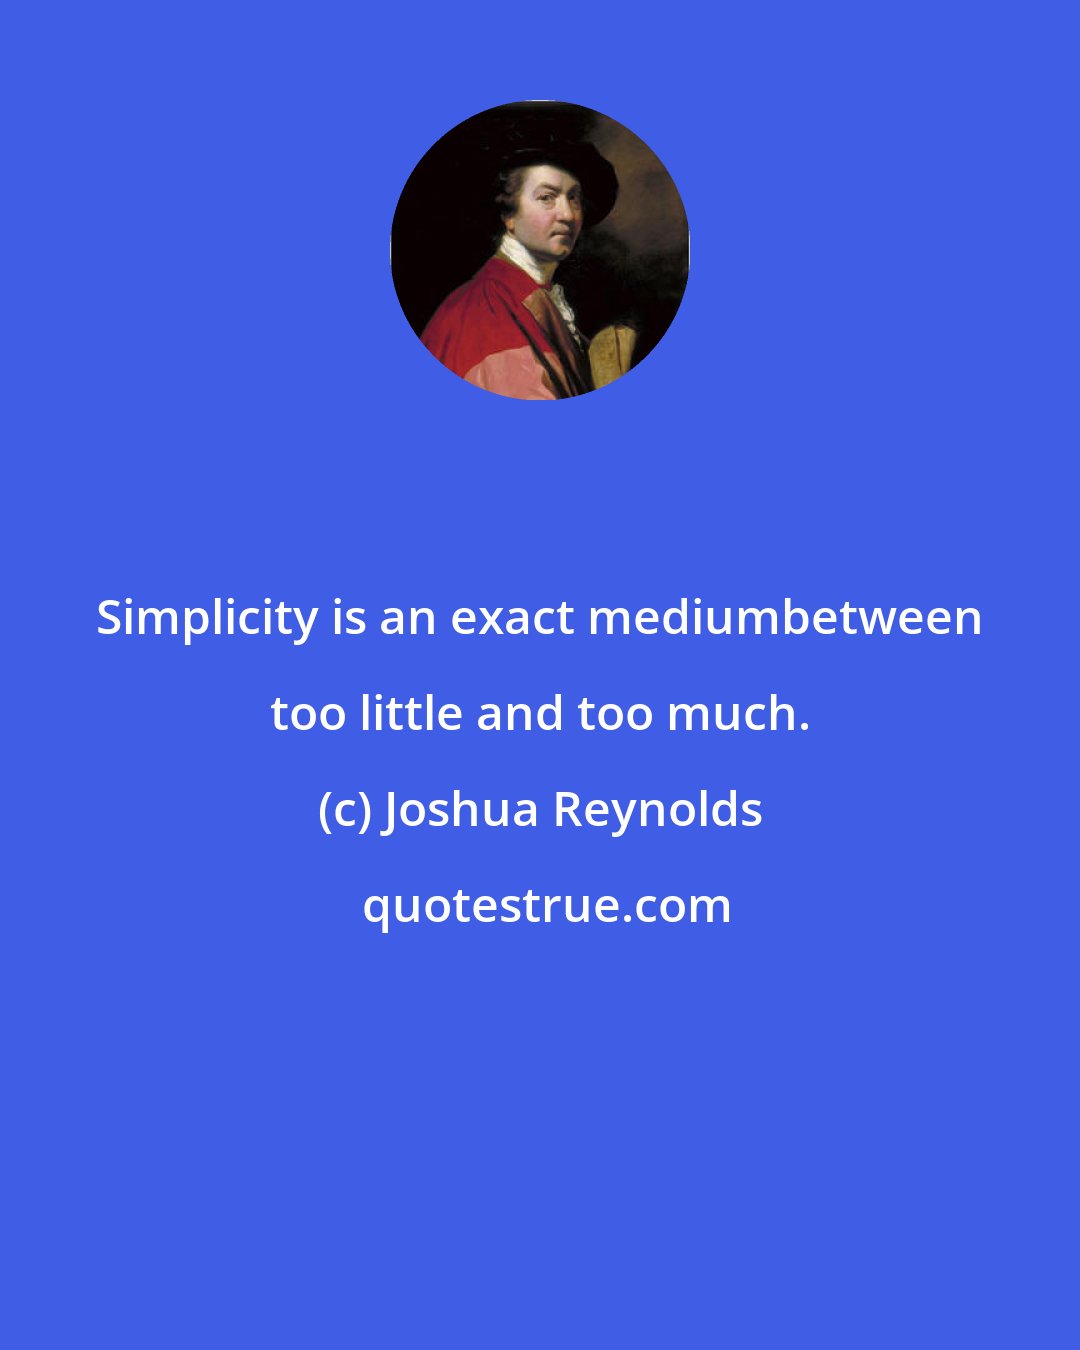 Joshua Reynolds: Simplicity is an exact mediumbetween too little and too much.